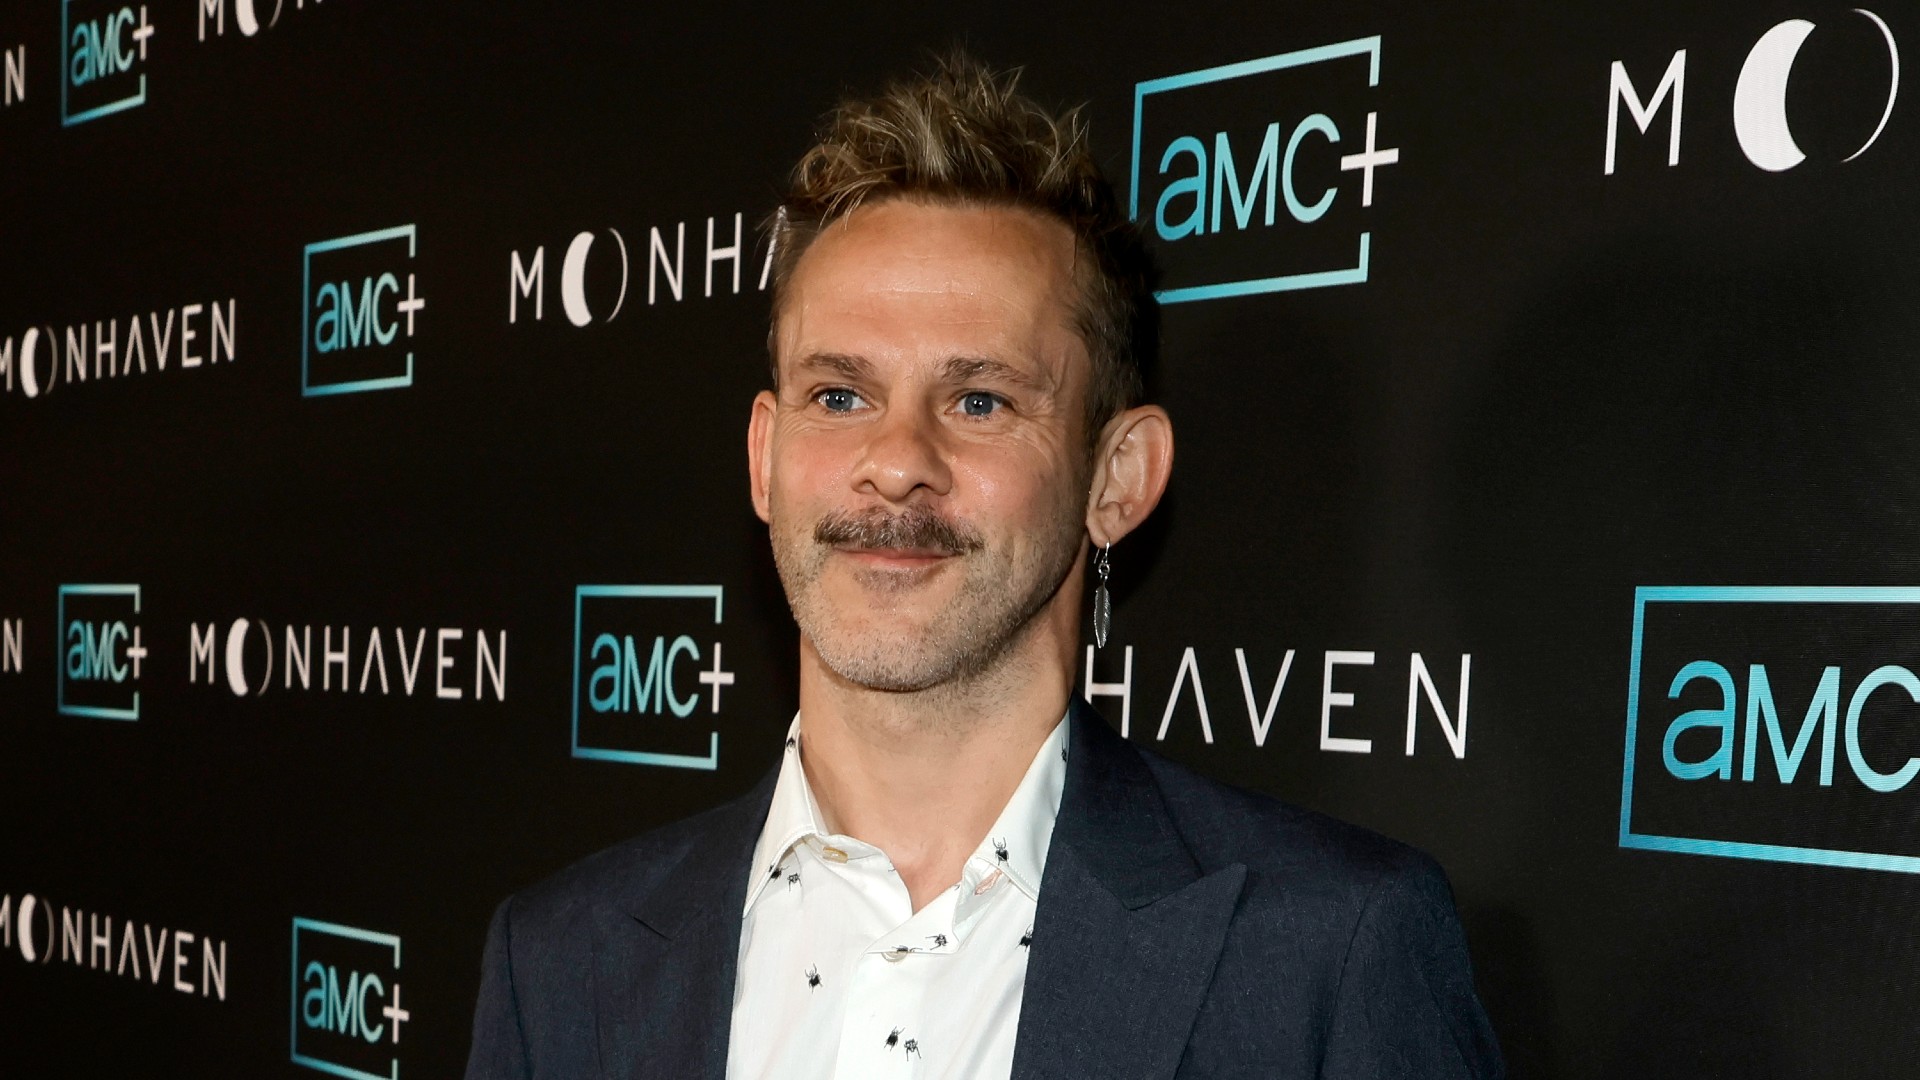 10 Things You May Not Know About 'Moonhaven' Star Dominic Monaghan